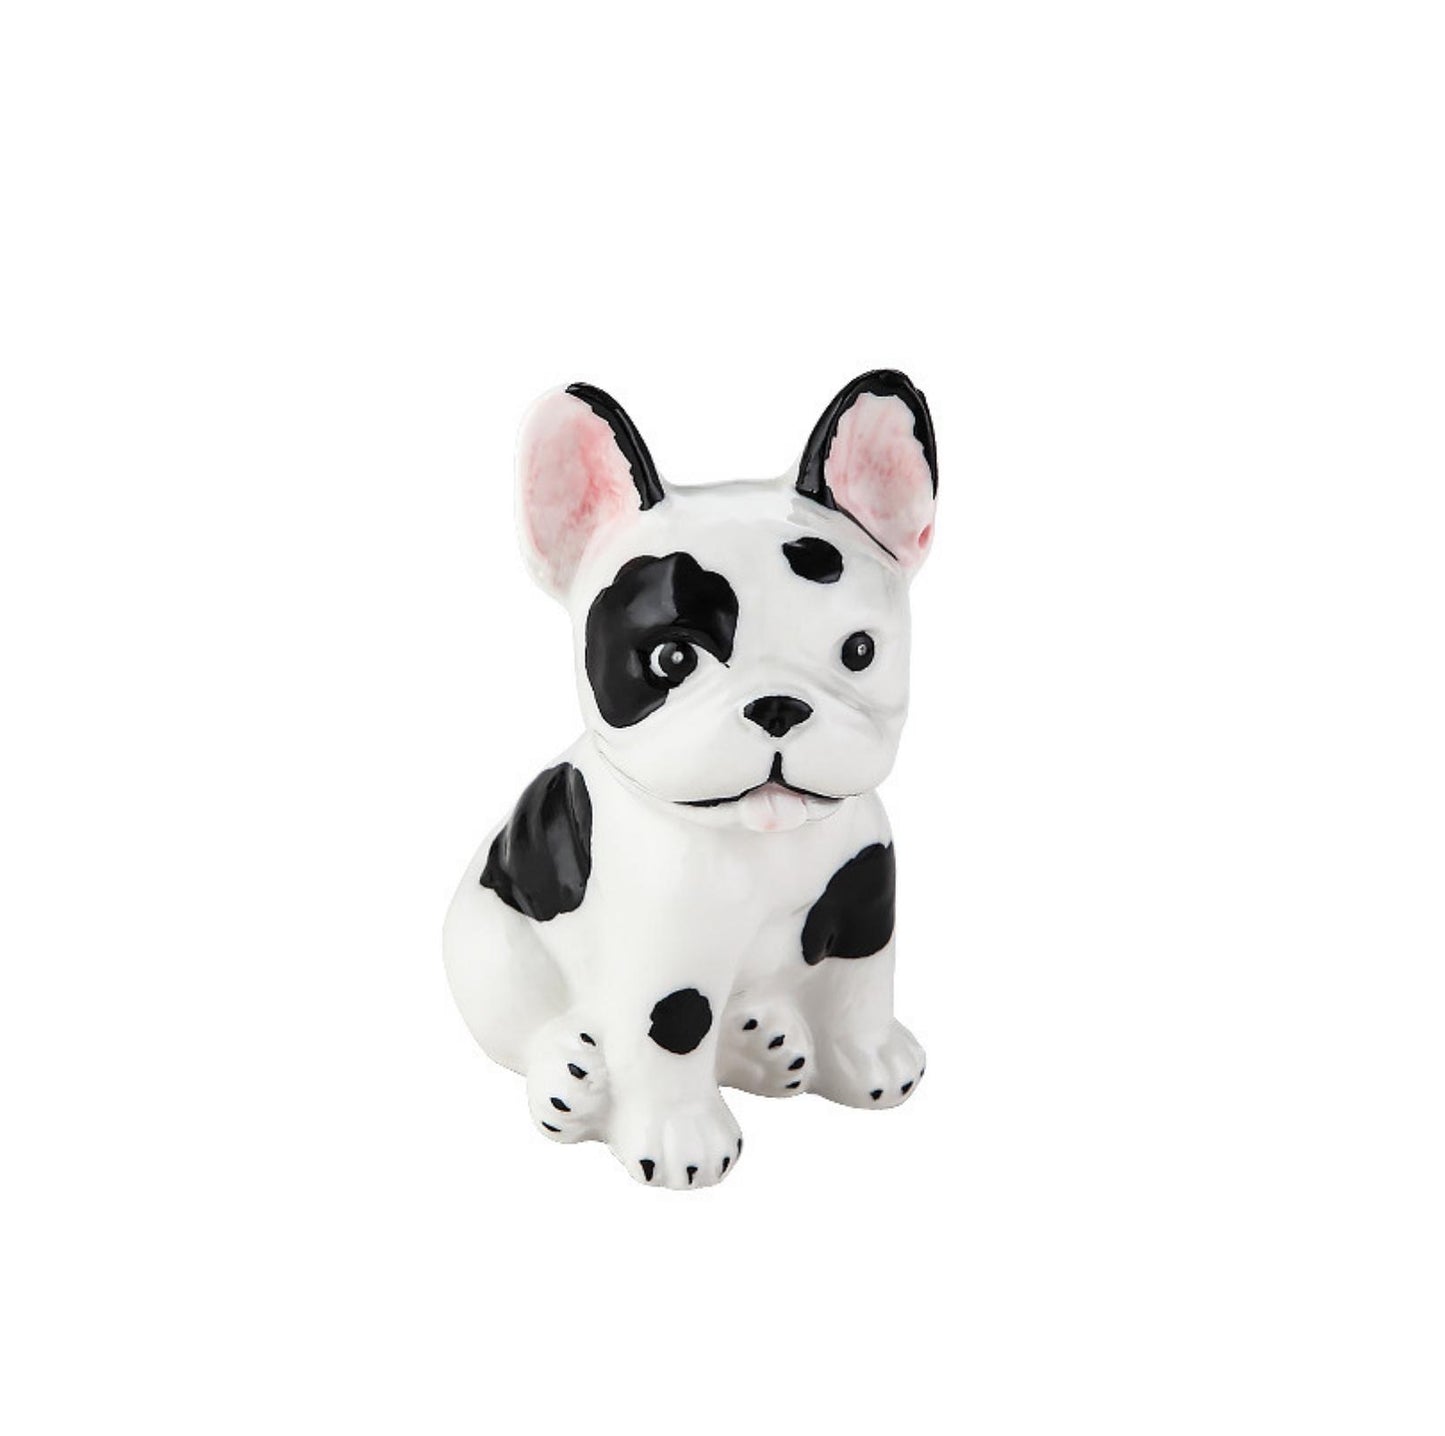 Ceramic Animal-Themed Home Decor Ornament - A Charming Homely Touch